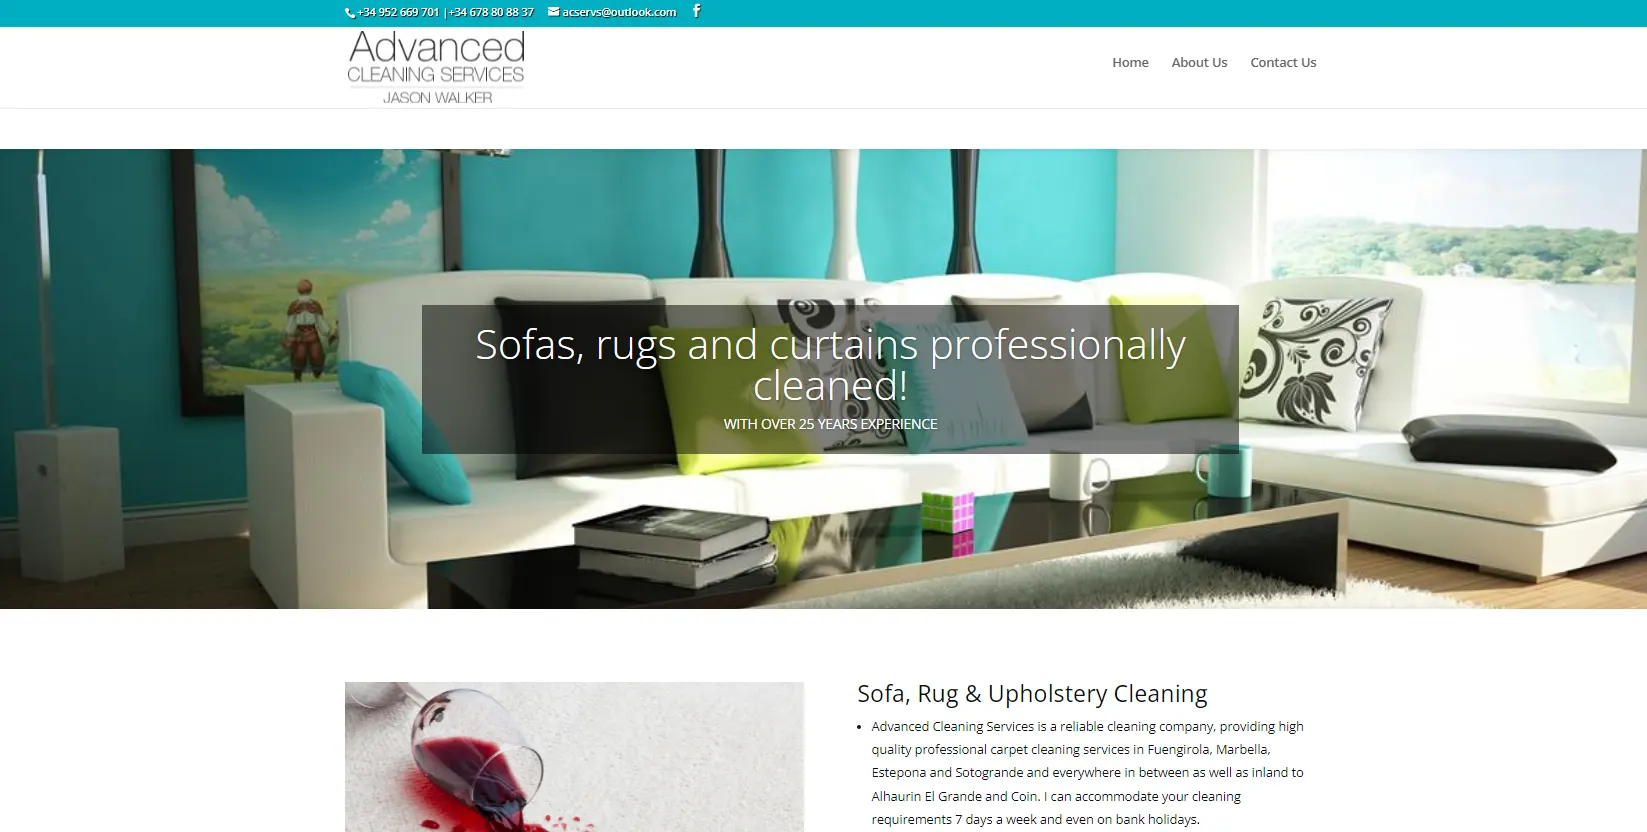 Advanced Cleaning Services